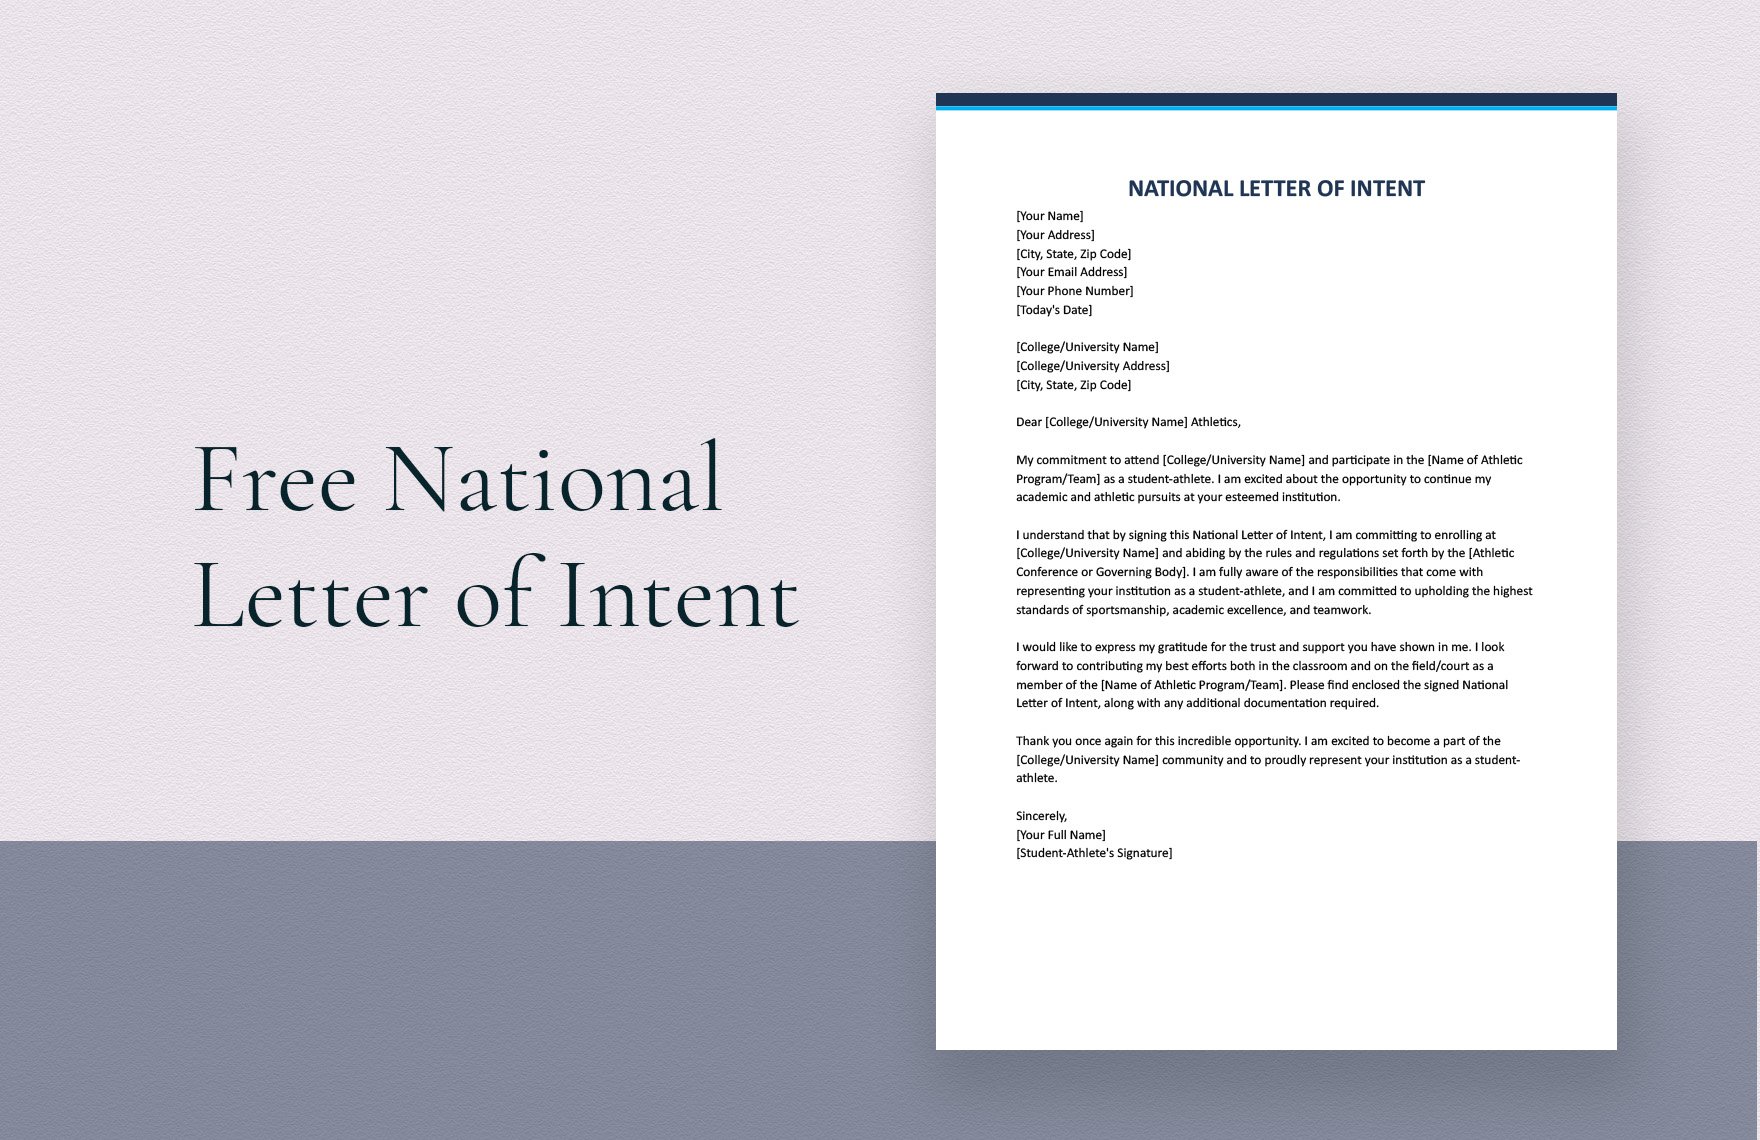 National Letter of Intent in Word, Google Docs